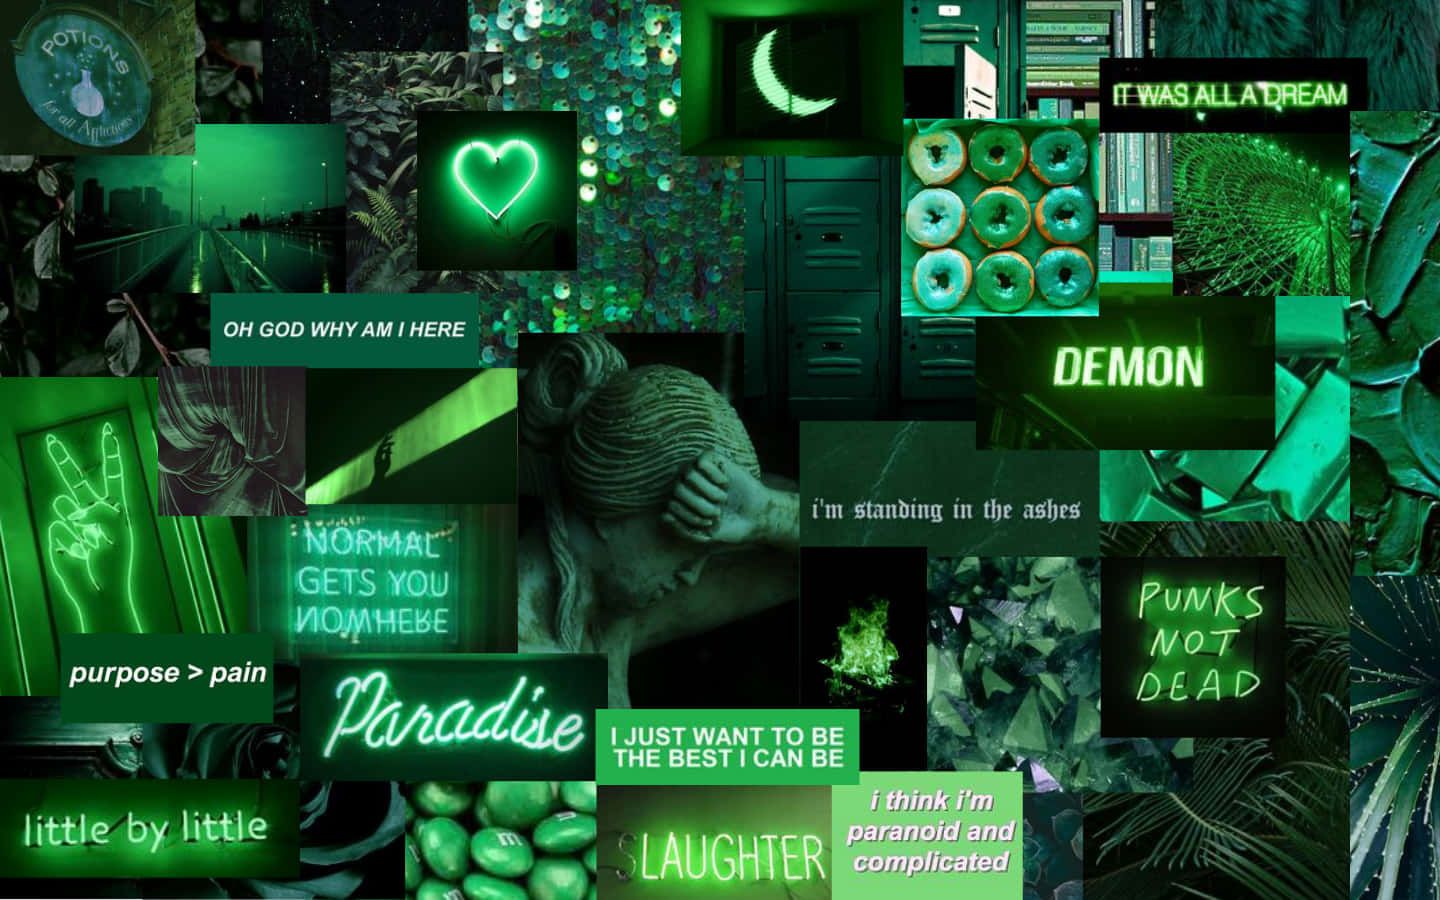 Aesthetic background with a lot of green images - Green, lime green